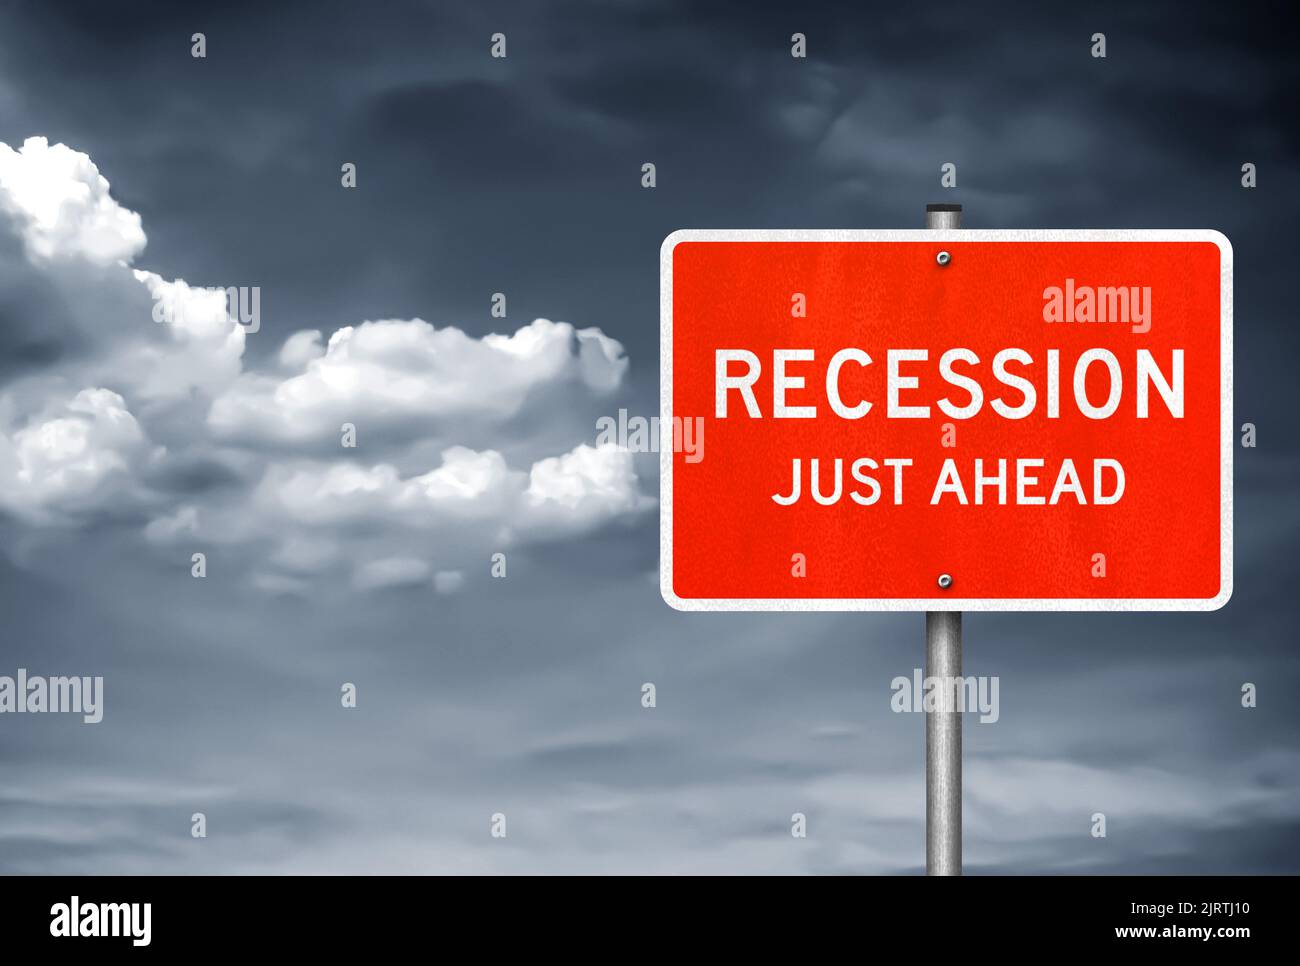 Road sign message - Recession just ahead Stock Photo